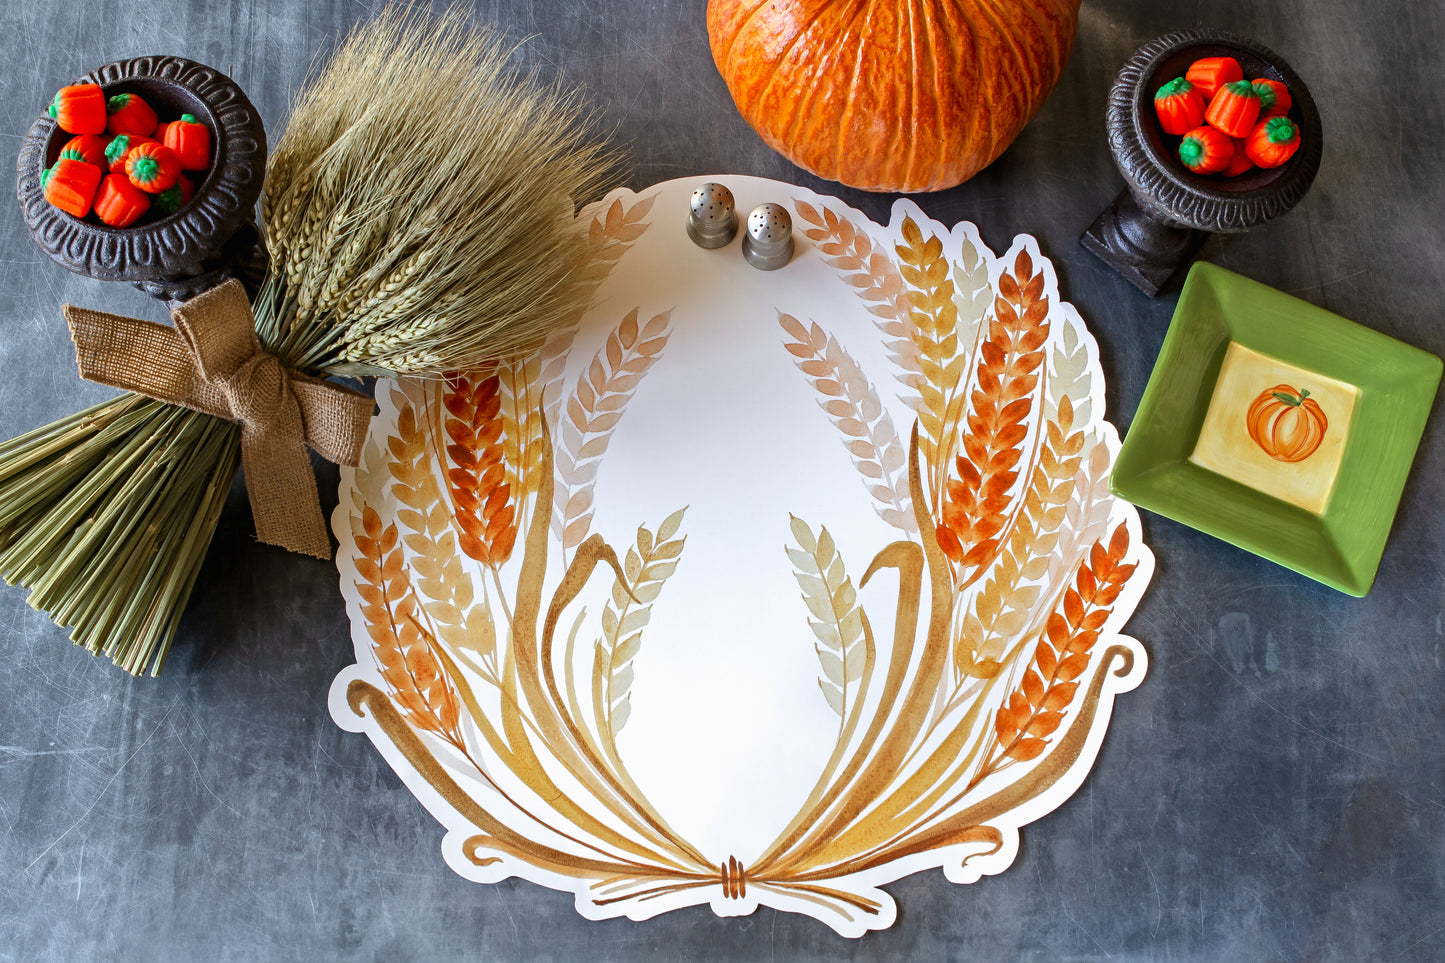 The 14 x 6 inch wheat bundle paired with die cut wheat paper placemat.